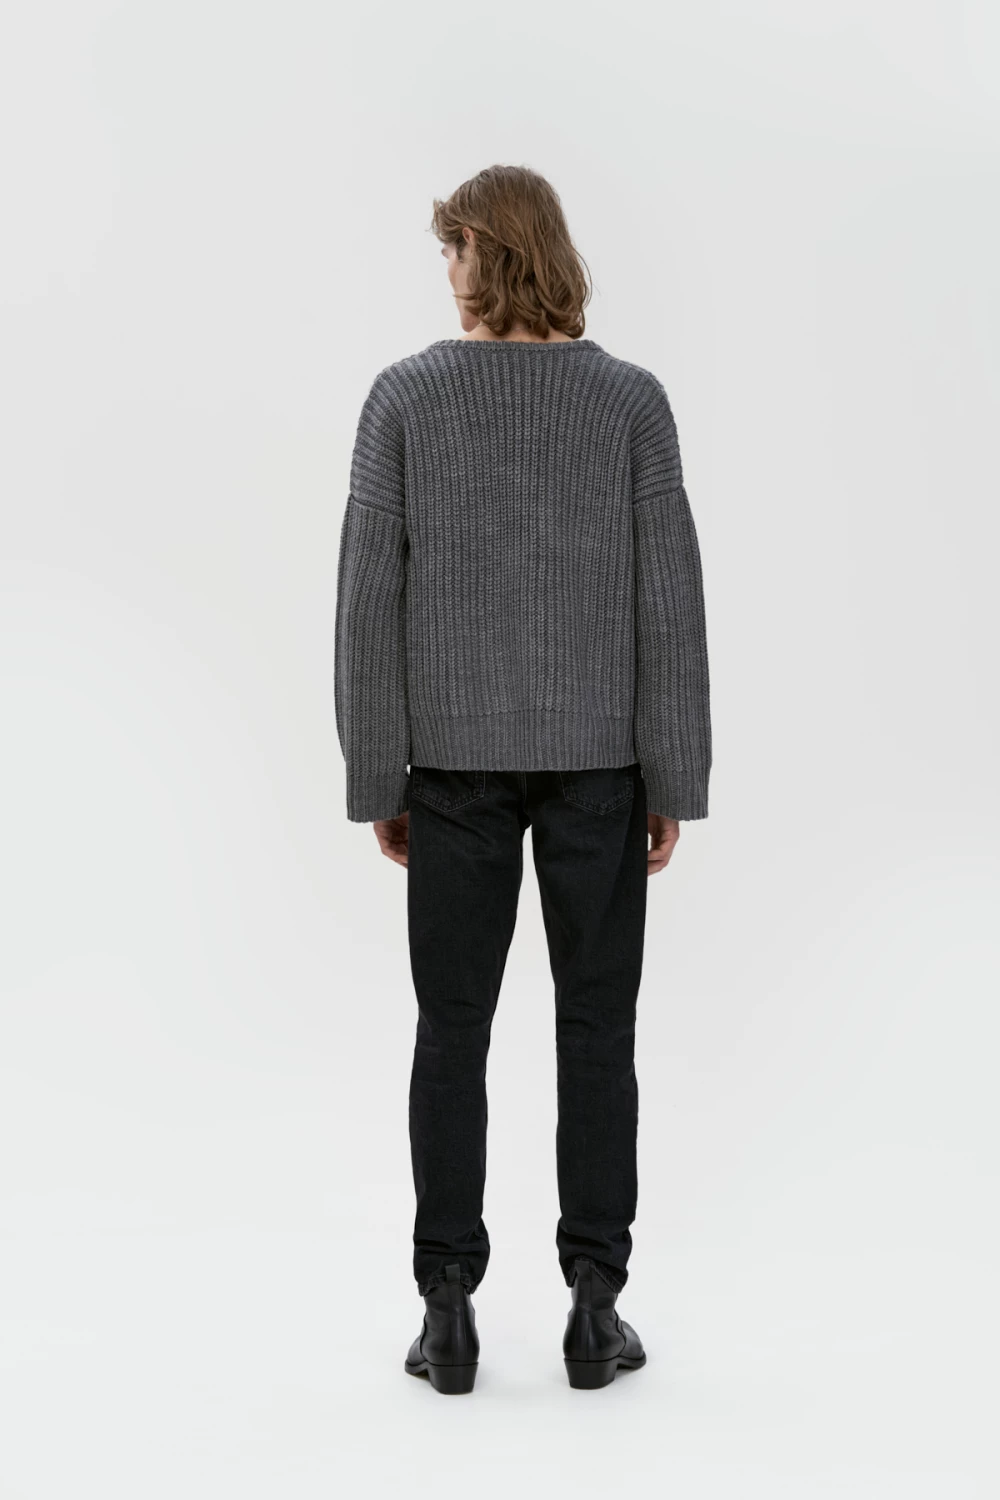 sweater with a deep v-neck sleeve in grey color